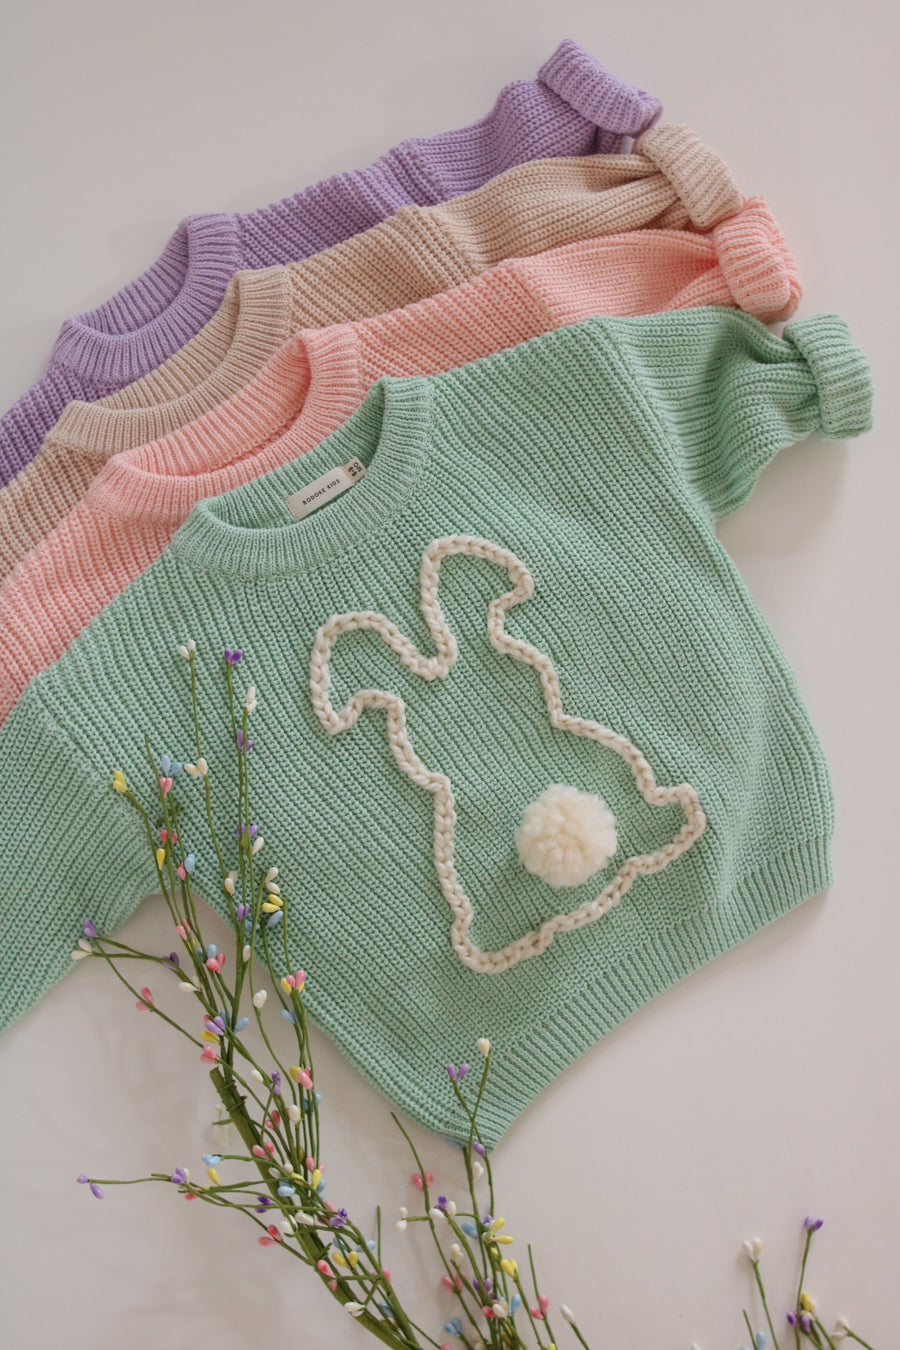 Bunny Handembroidered Sweater